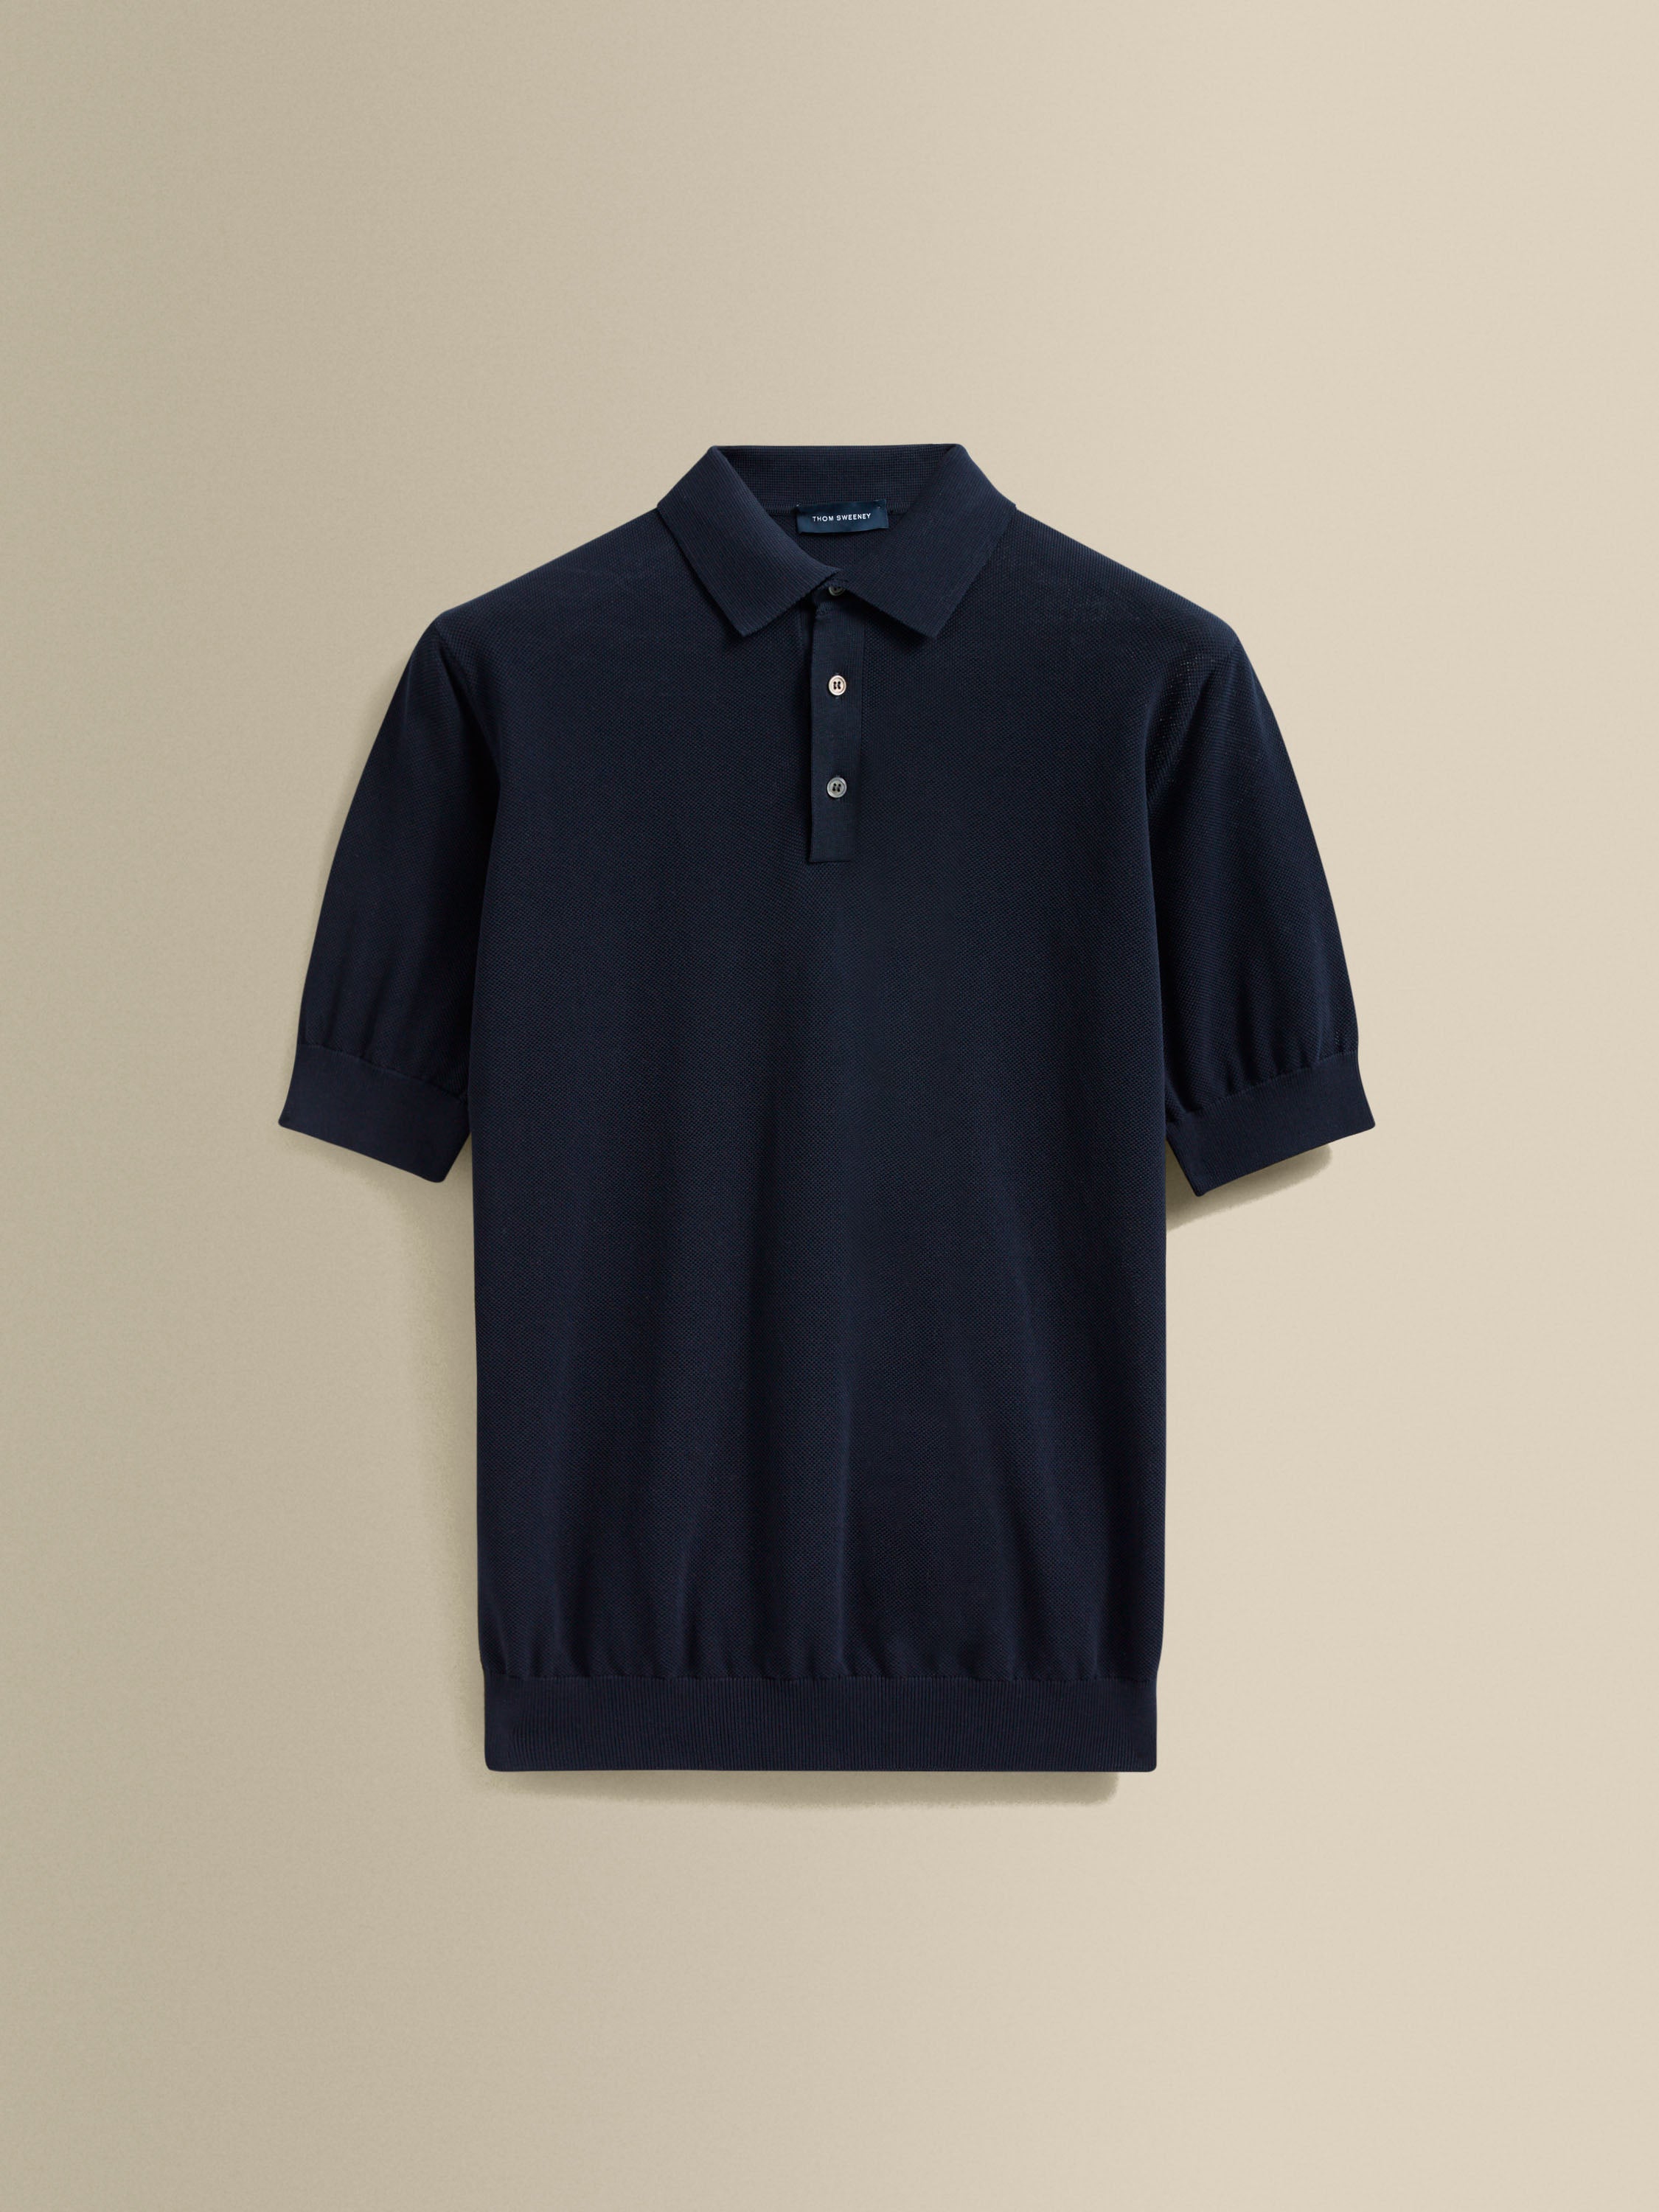 Cotton Air Crepe Polo Shirt Navy Product Image